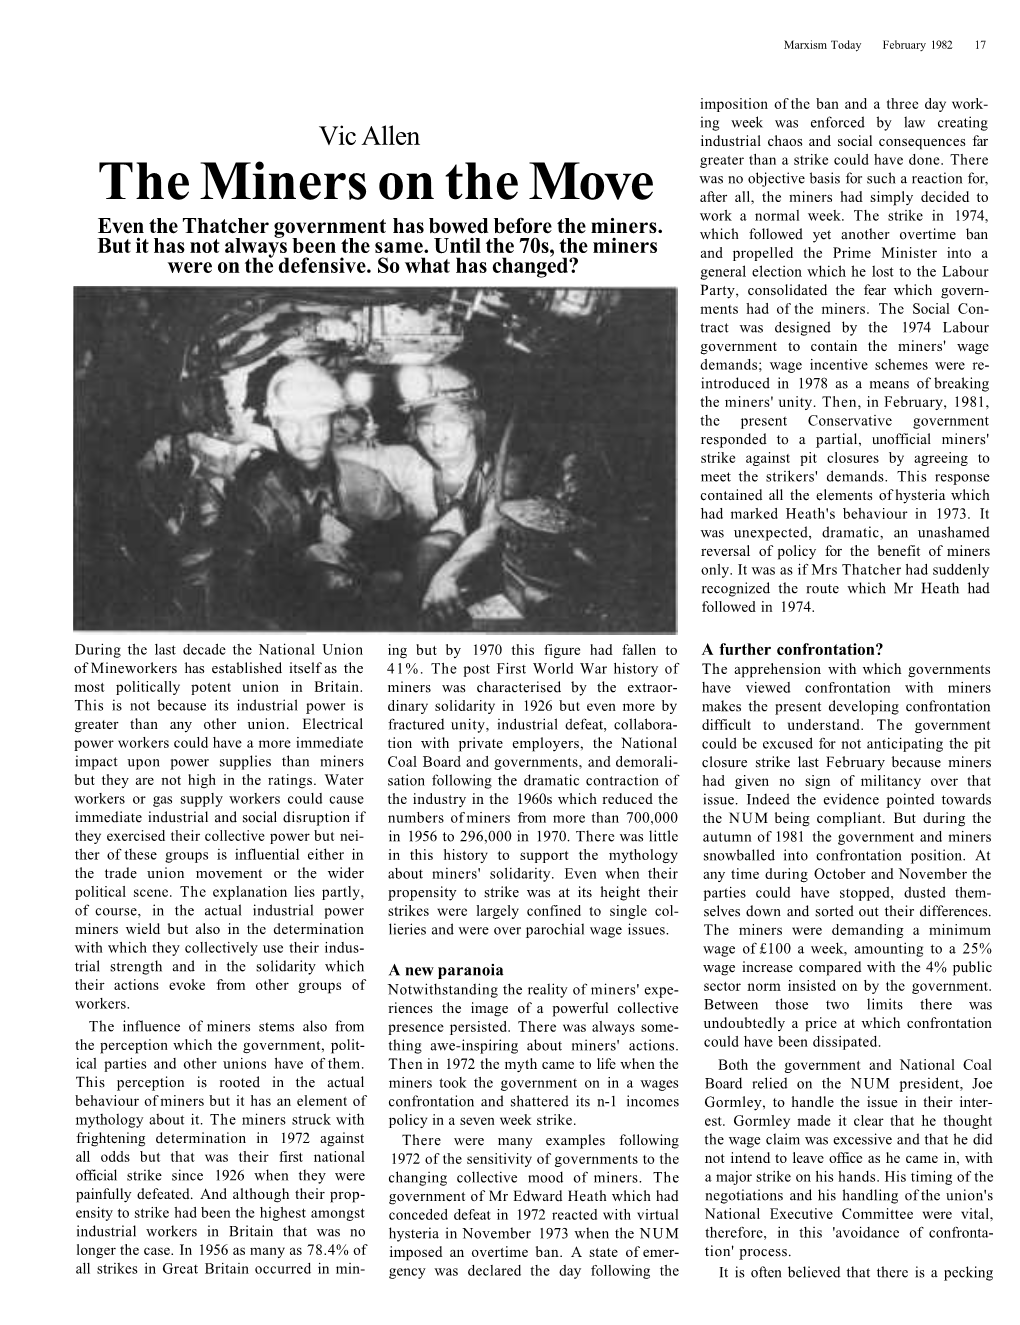 The Miners on the Move After All, the Miners Had Simply Decided to Work a Normal Week